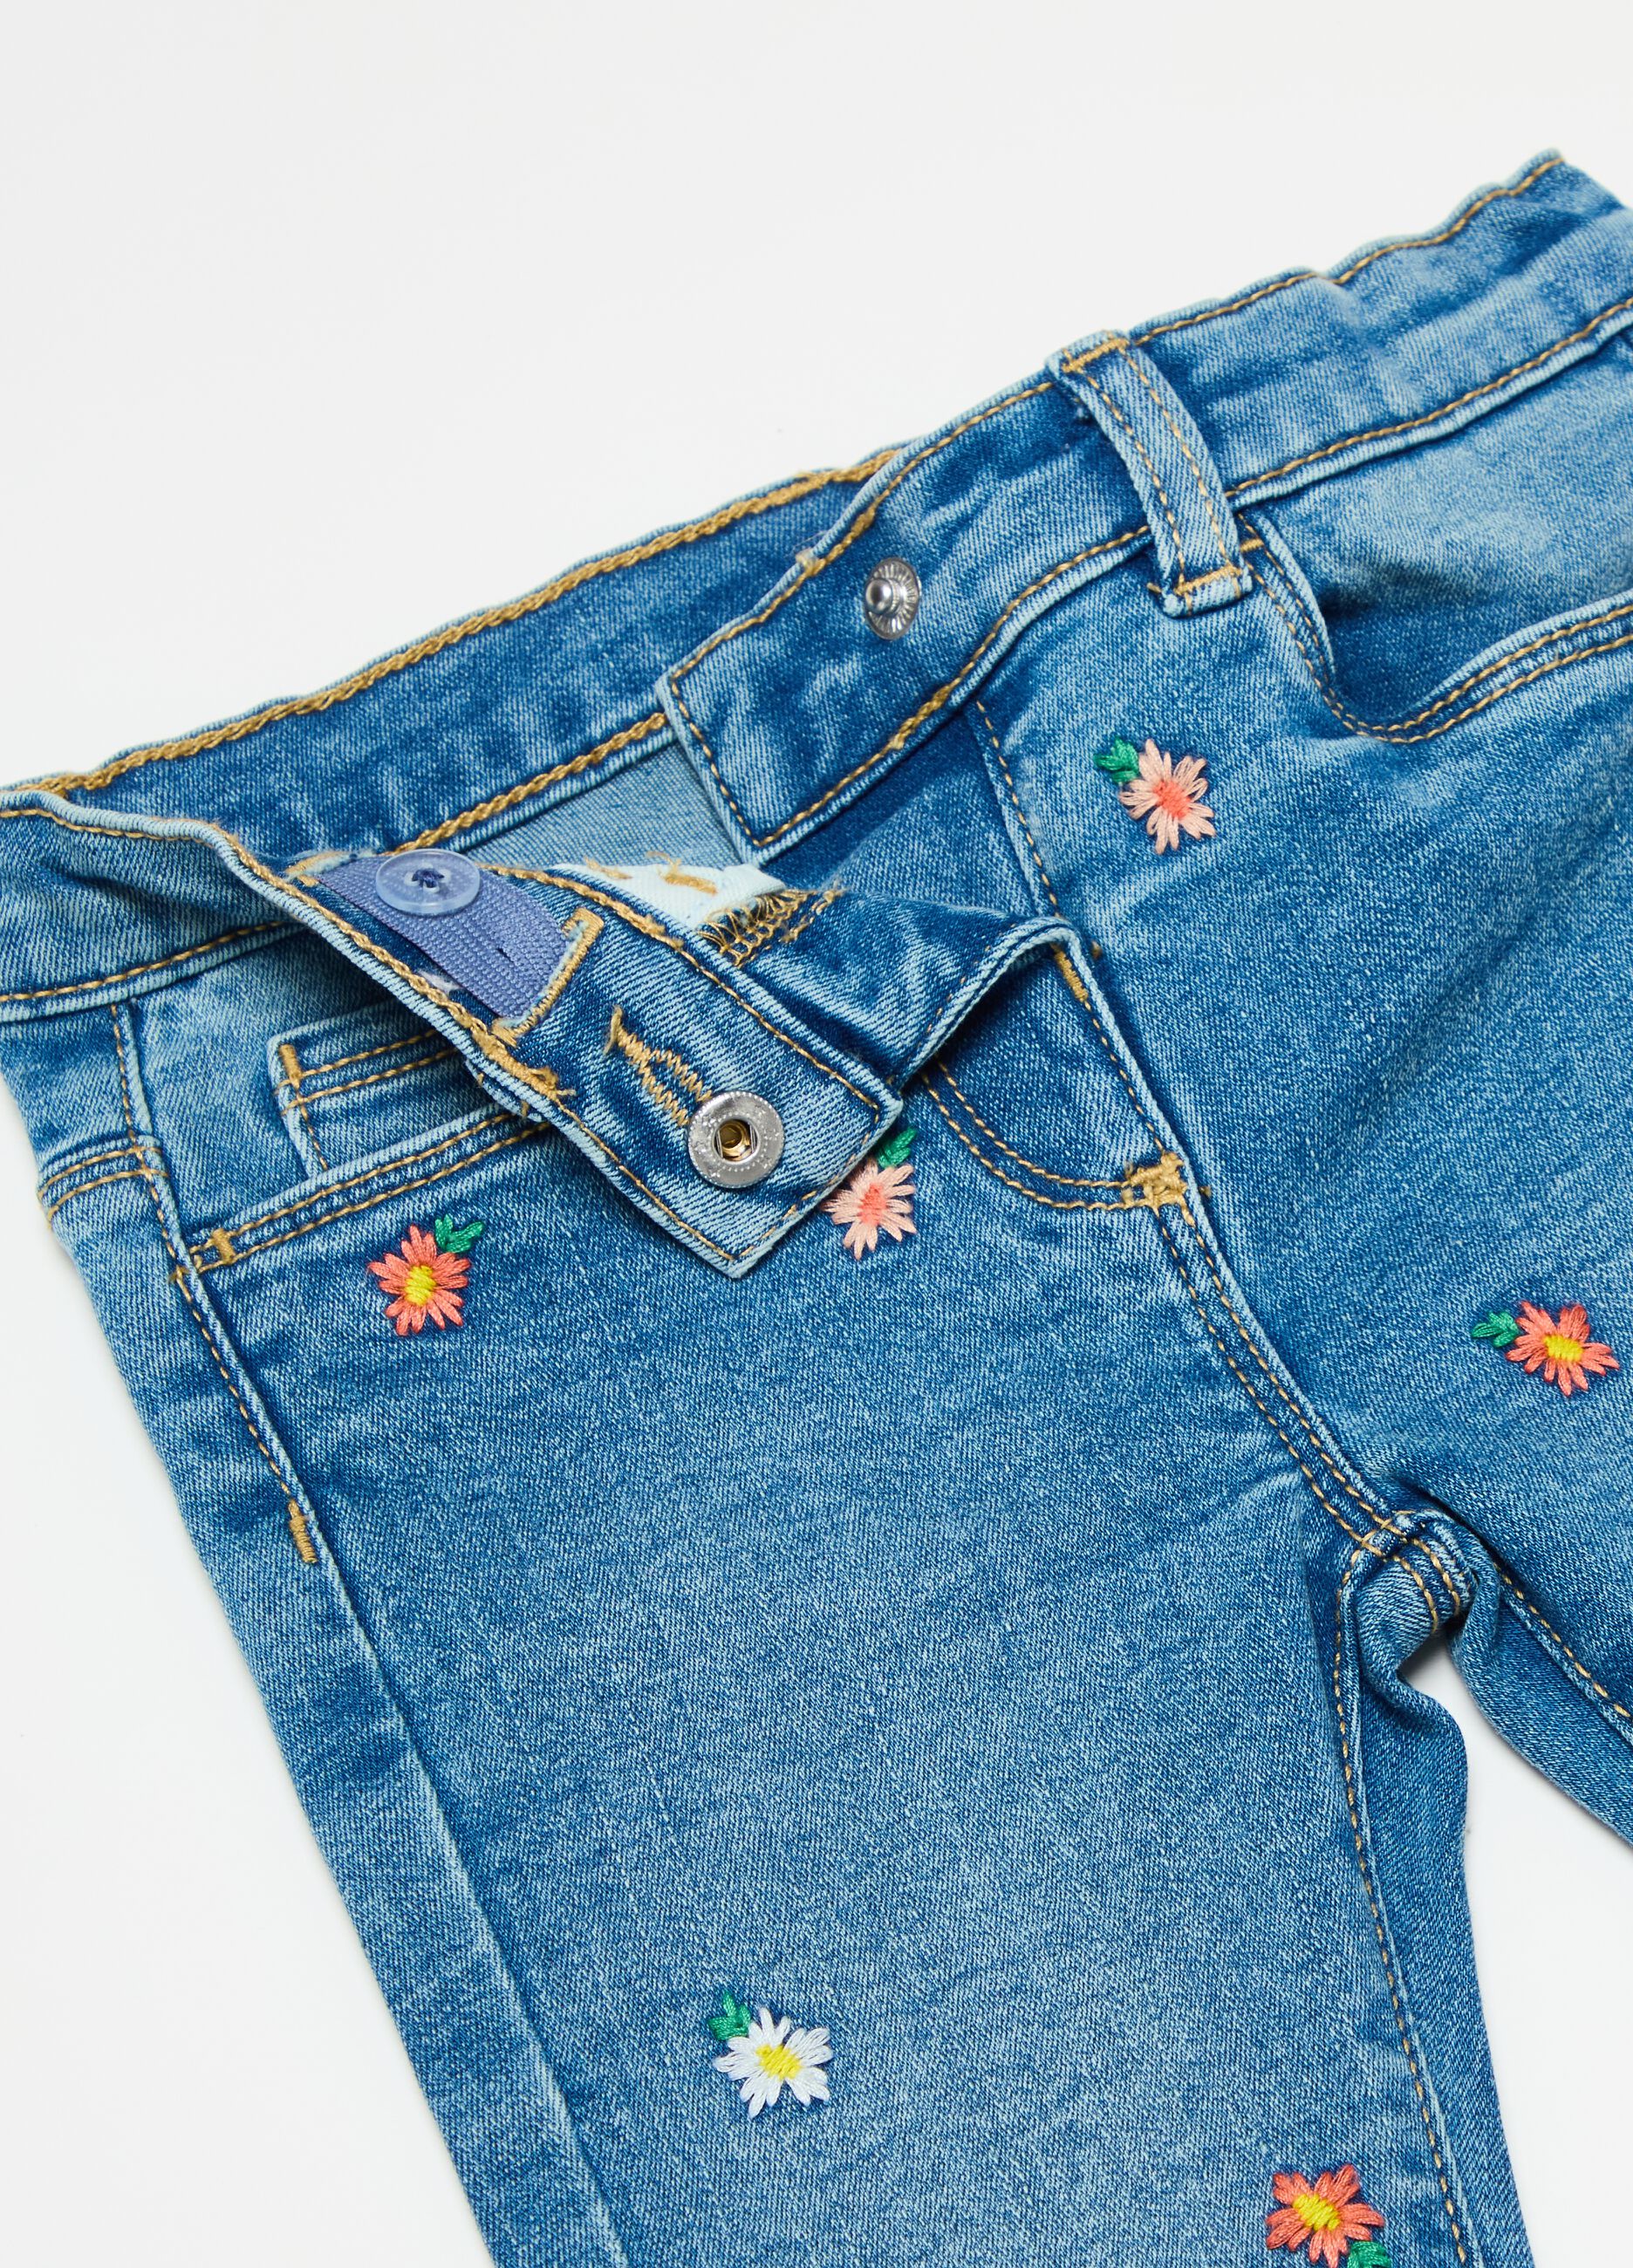 Jeans with small flowers embroidery